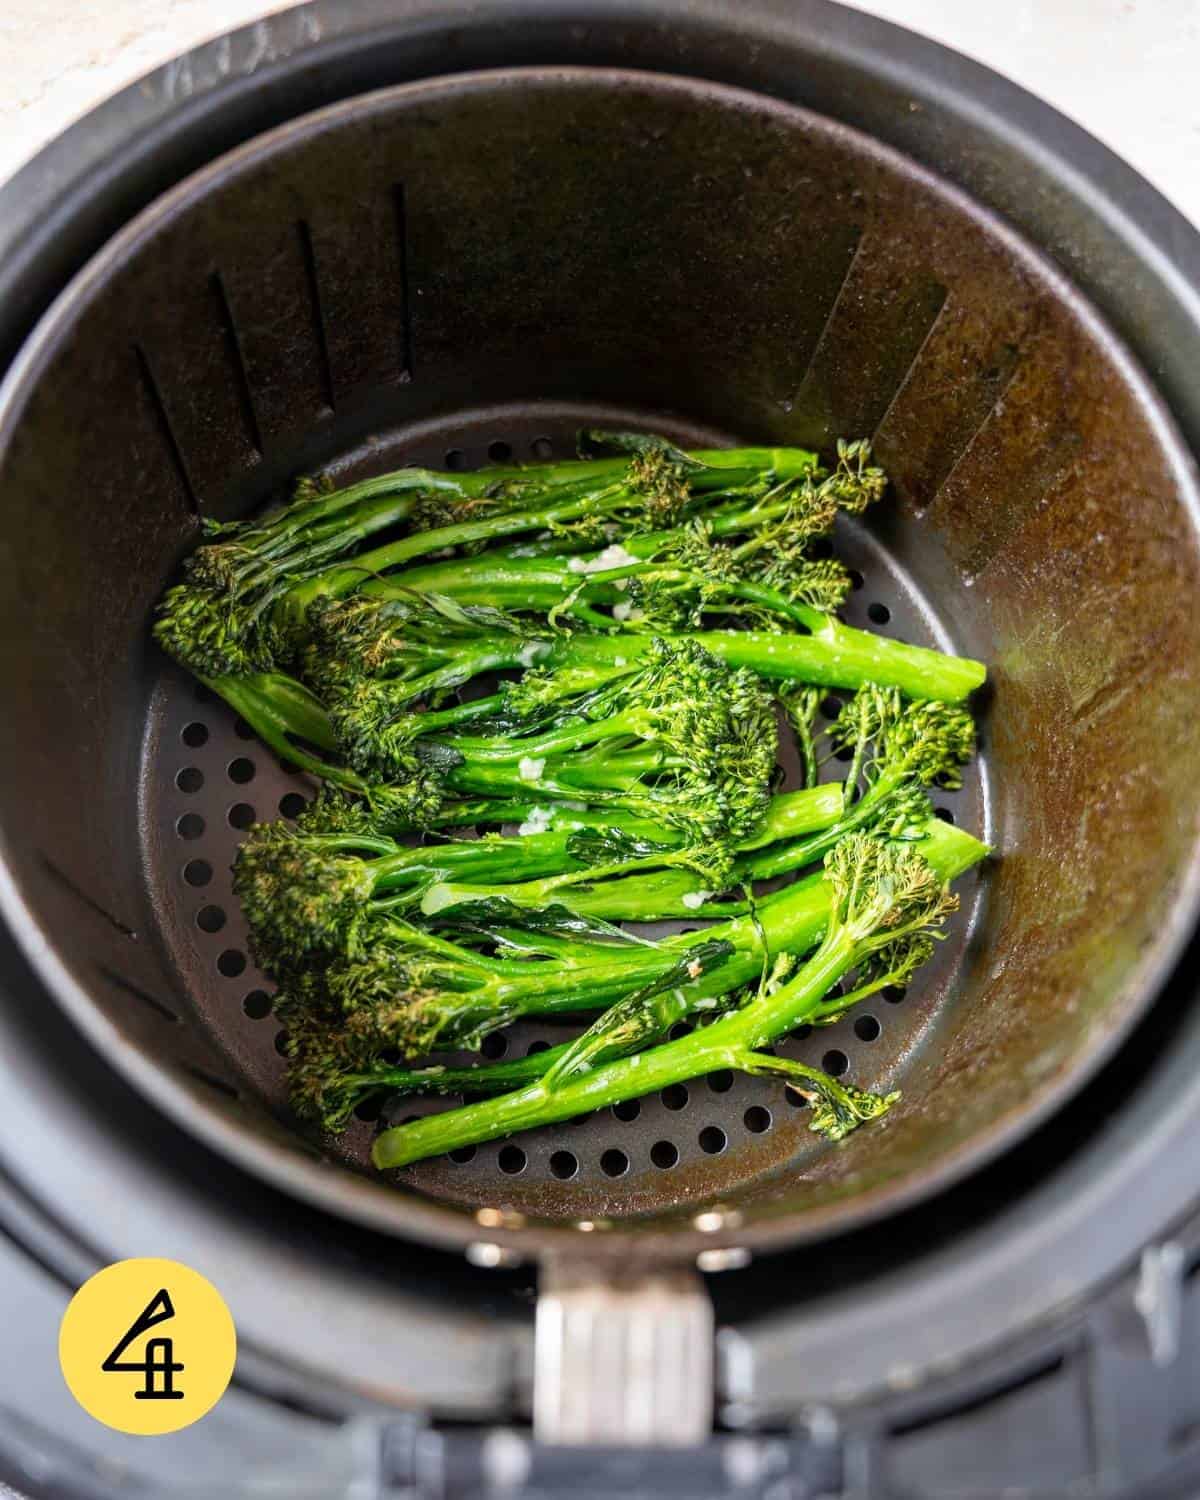 Cooked broccolini in an air fryer basket.